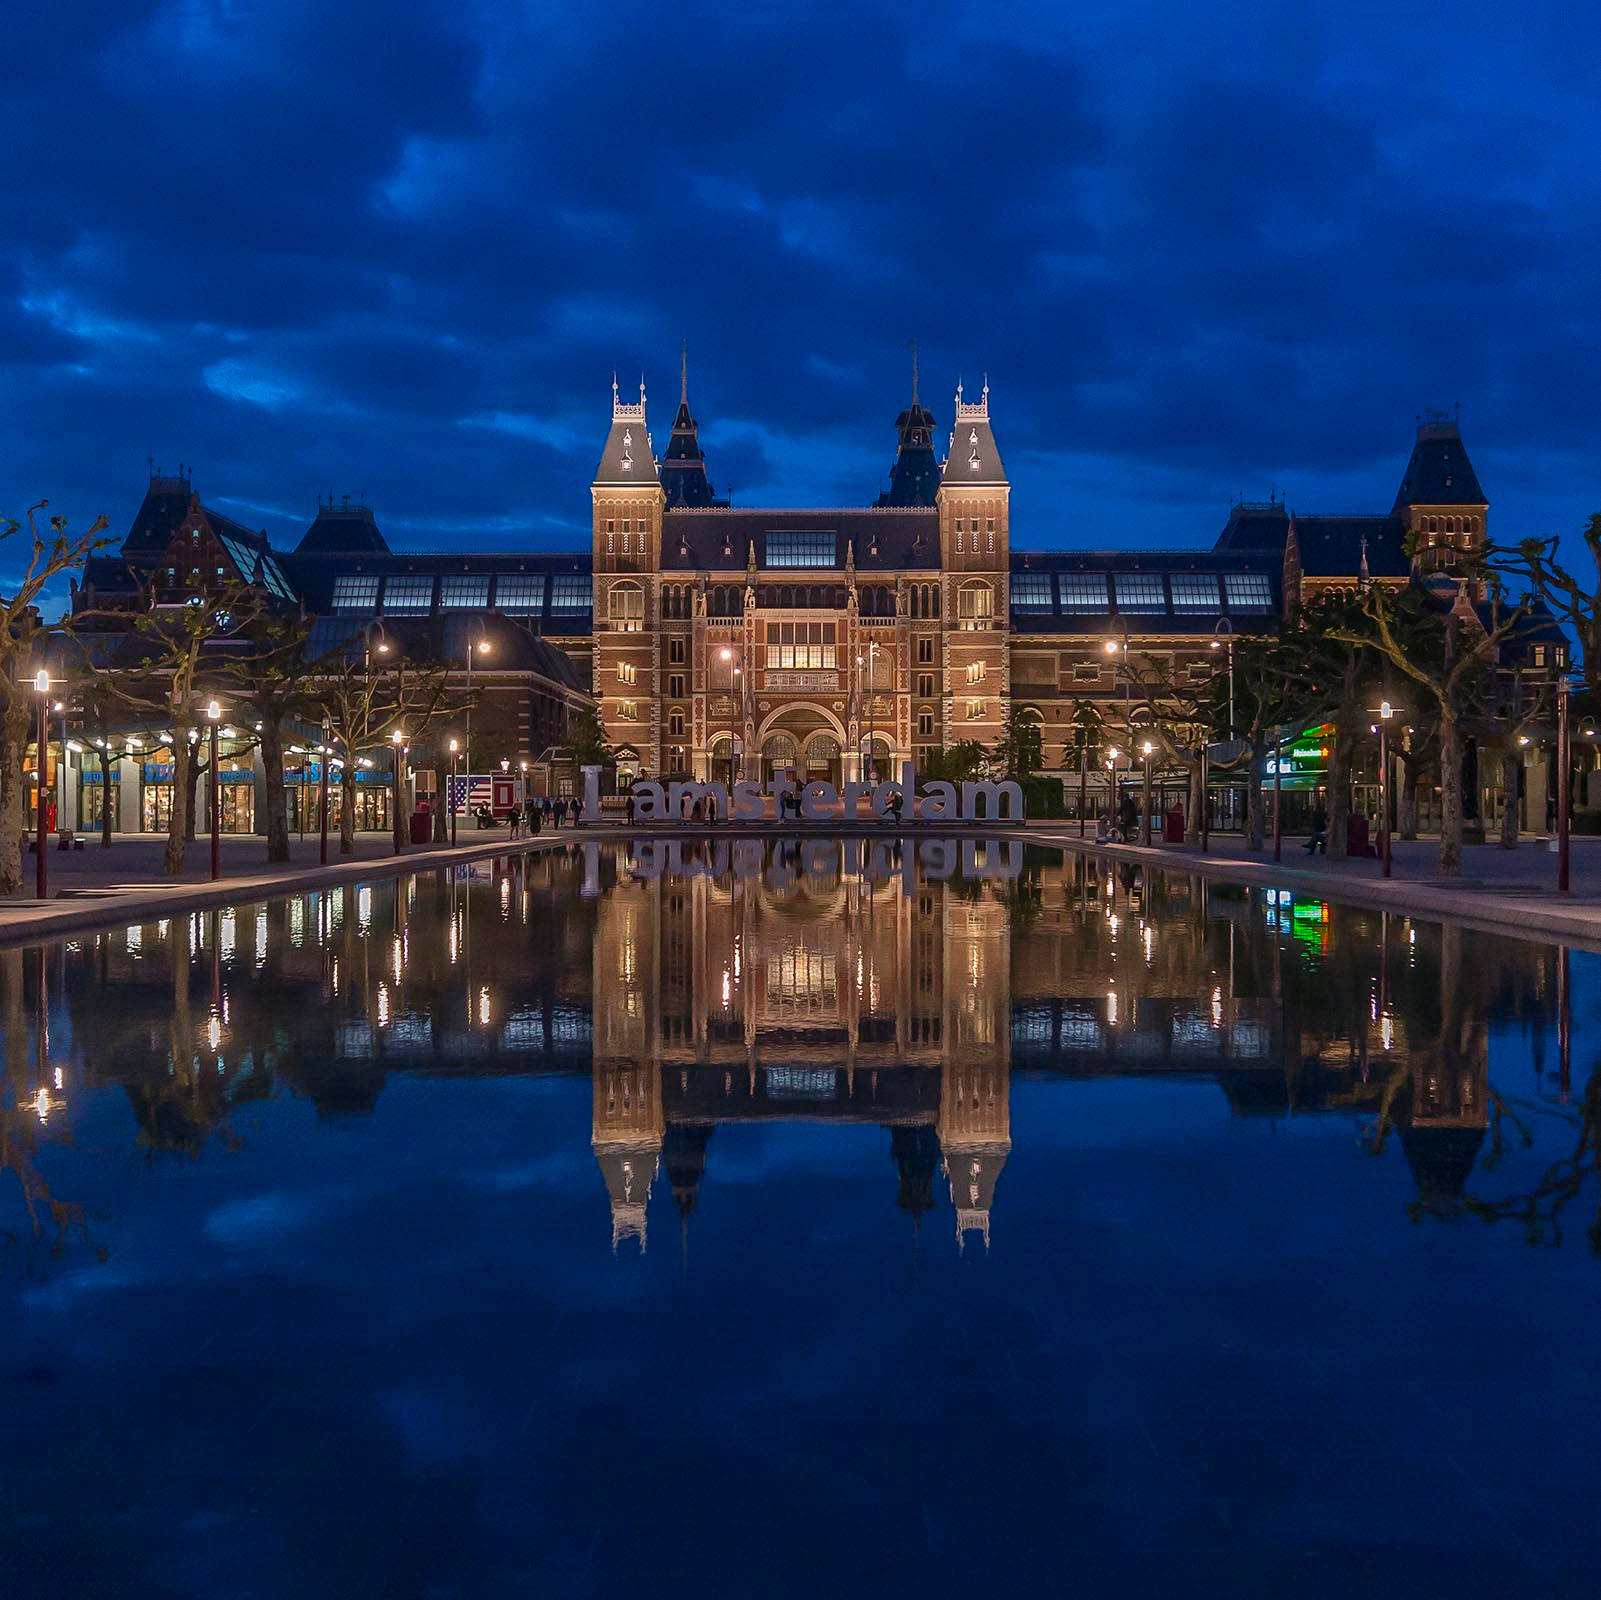 Rijksmuseum With Blue Sky At Night Background